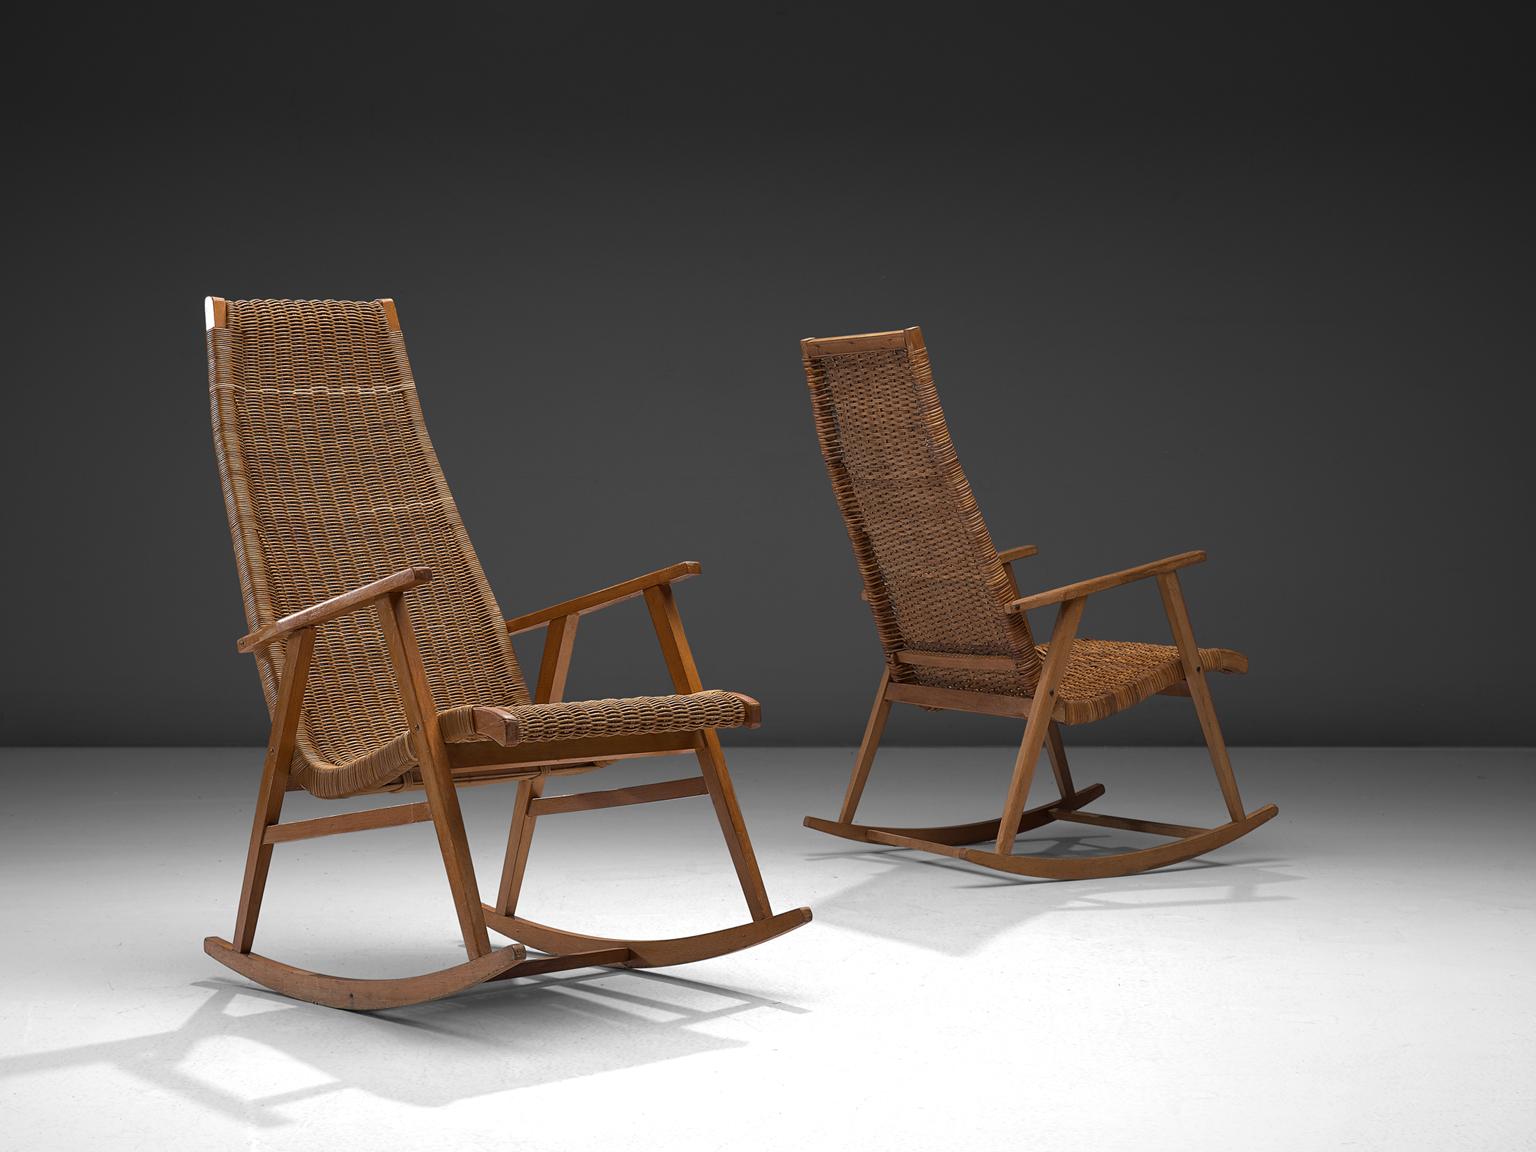 One lounge chairs, in cane and wood, The Netherlands, 1950s.

The Dutch rocking chair feature a simplistic, functional frame. The back of the chair however is unusually long giving this comfortable chair a certain grandeur and stateliness. The